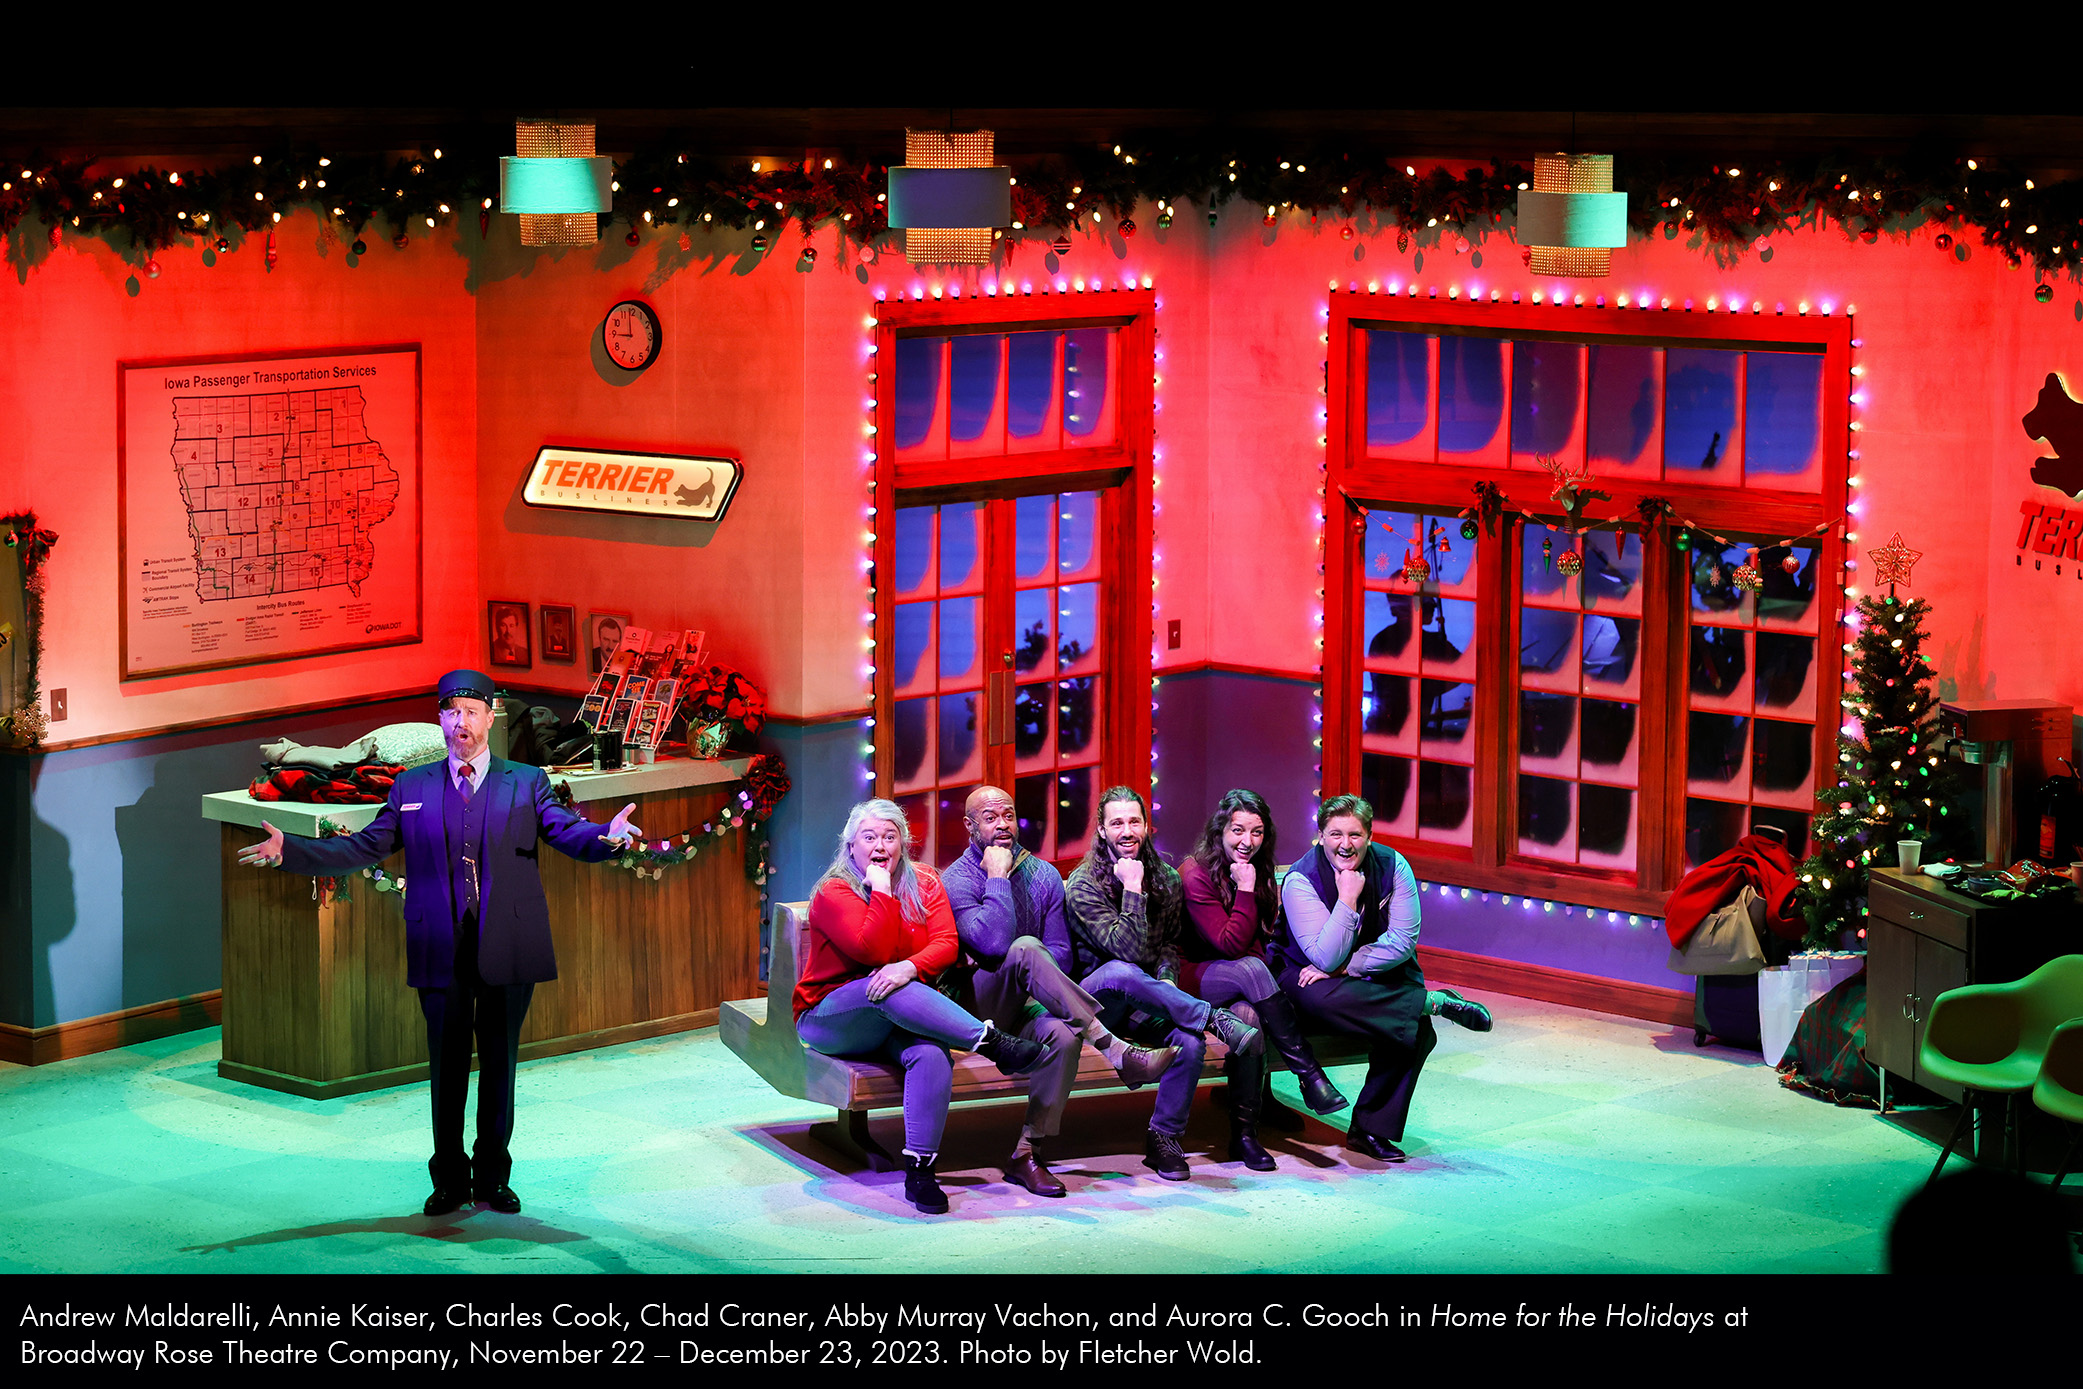 Andrew Maldarelli, Annie Kaiser, Charles Cook, Chad Craner, Abby Murray Vachon, and Aurora C. Gooch in Home for the Holidays at Broadway Rose Theatre Company, November 22 – December 23, 2023. Photo by Fletcher Wold.